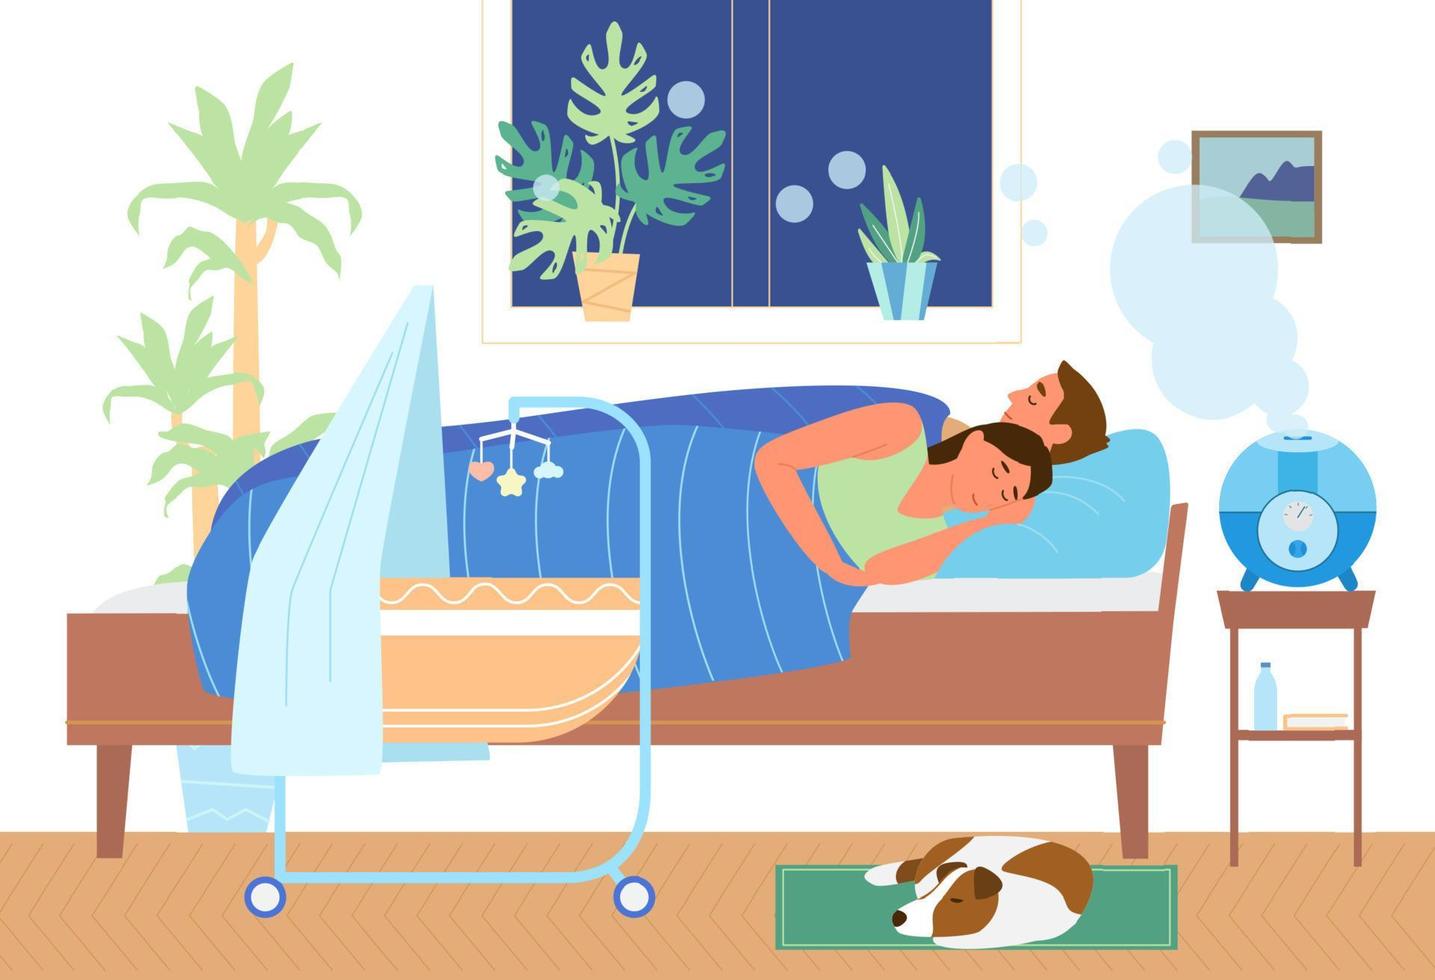 Ultrasonic Air Humidifier Working In Bedroom With Family Sleeping . Couple In Bed Near Cradle, Dog Sleeping. Vector Illustration.